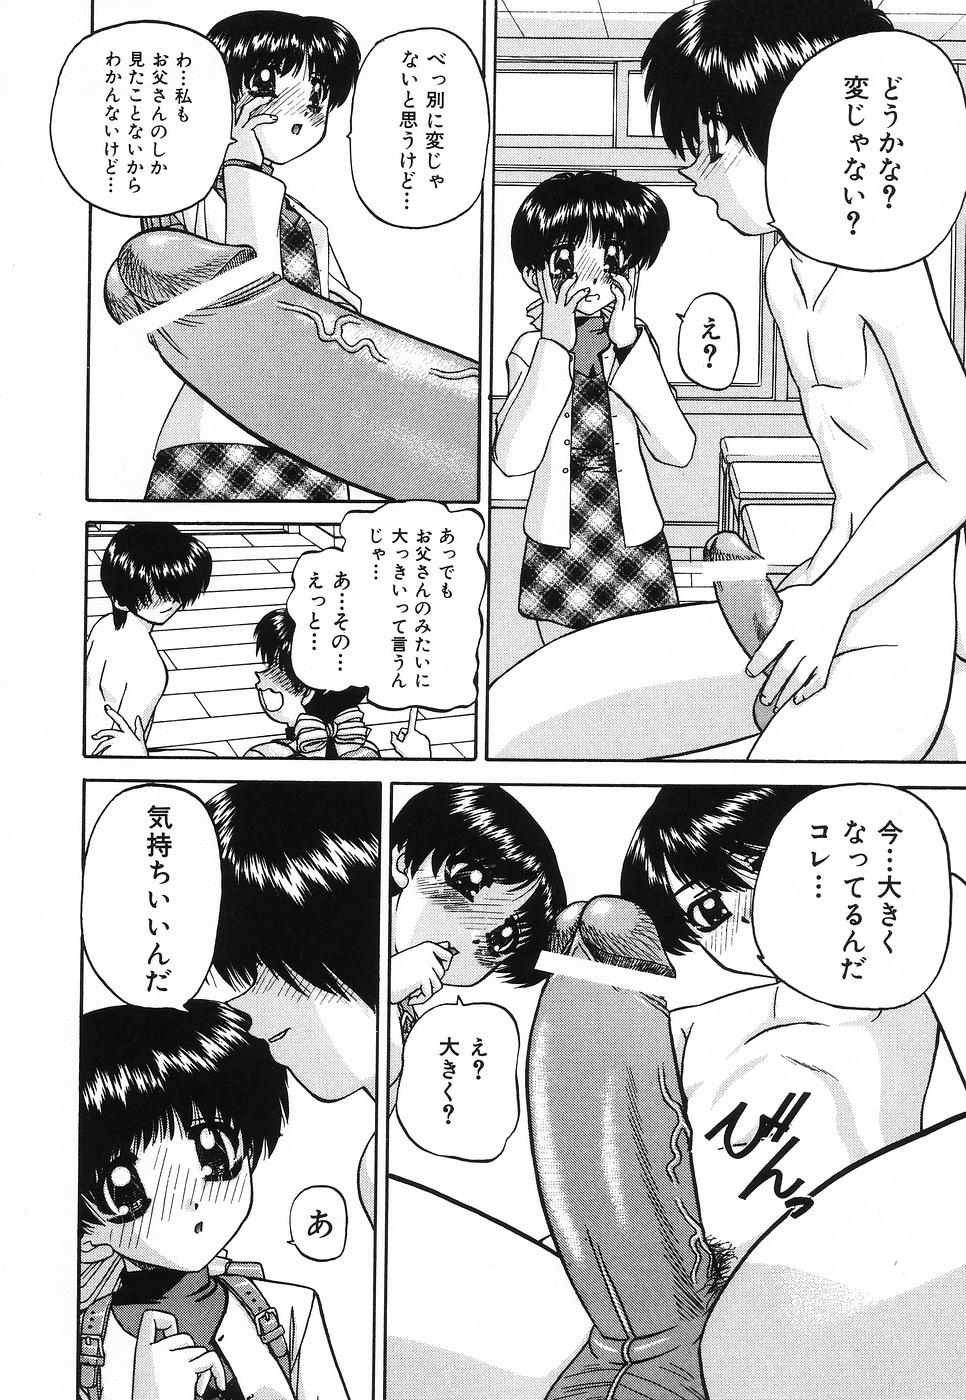 [Chunrouzan] Hime Hajime - First sexual intercourse in a New Year page 15 full